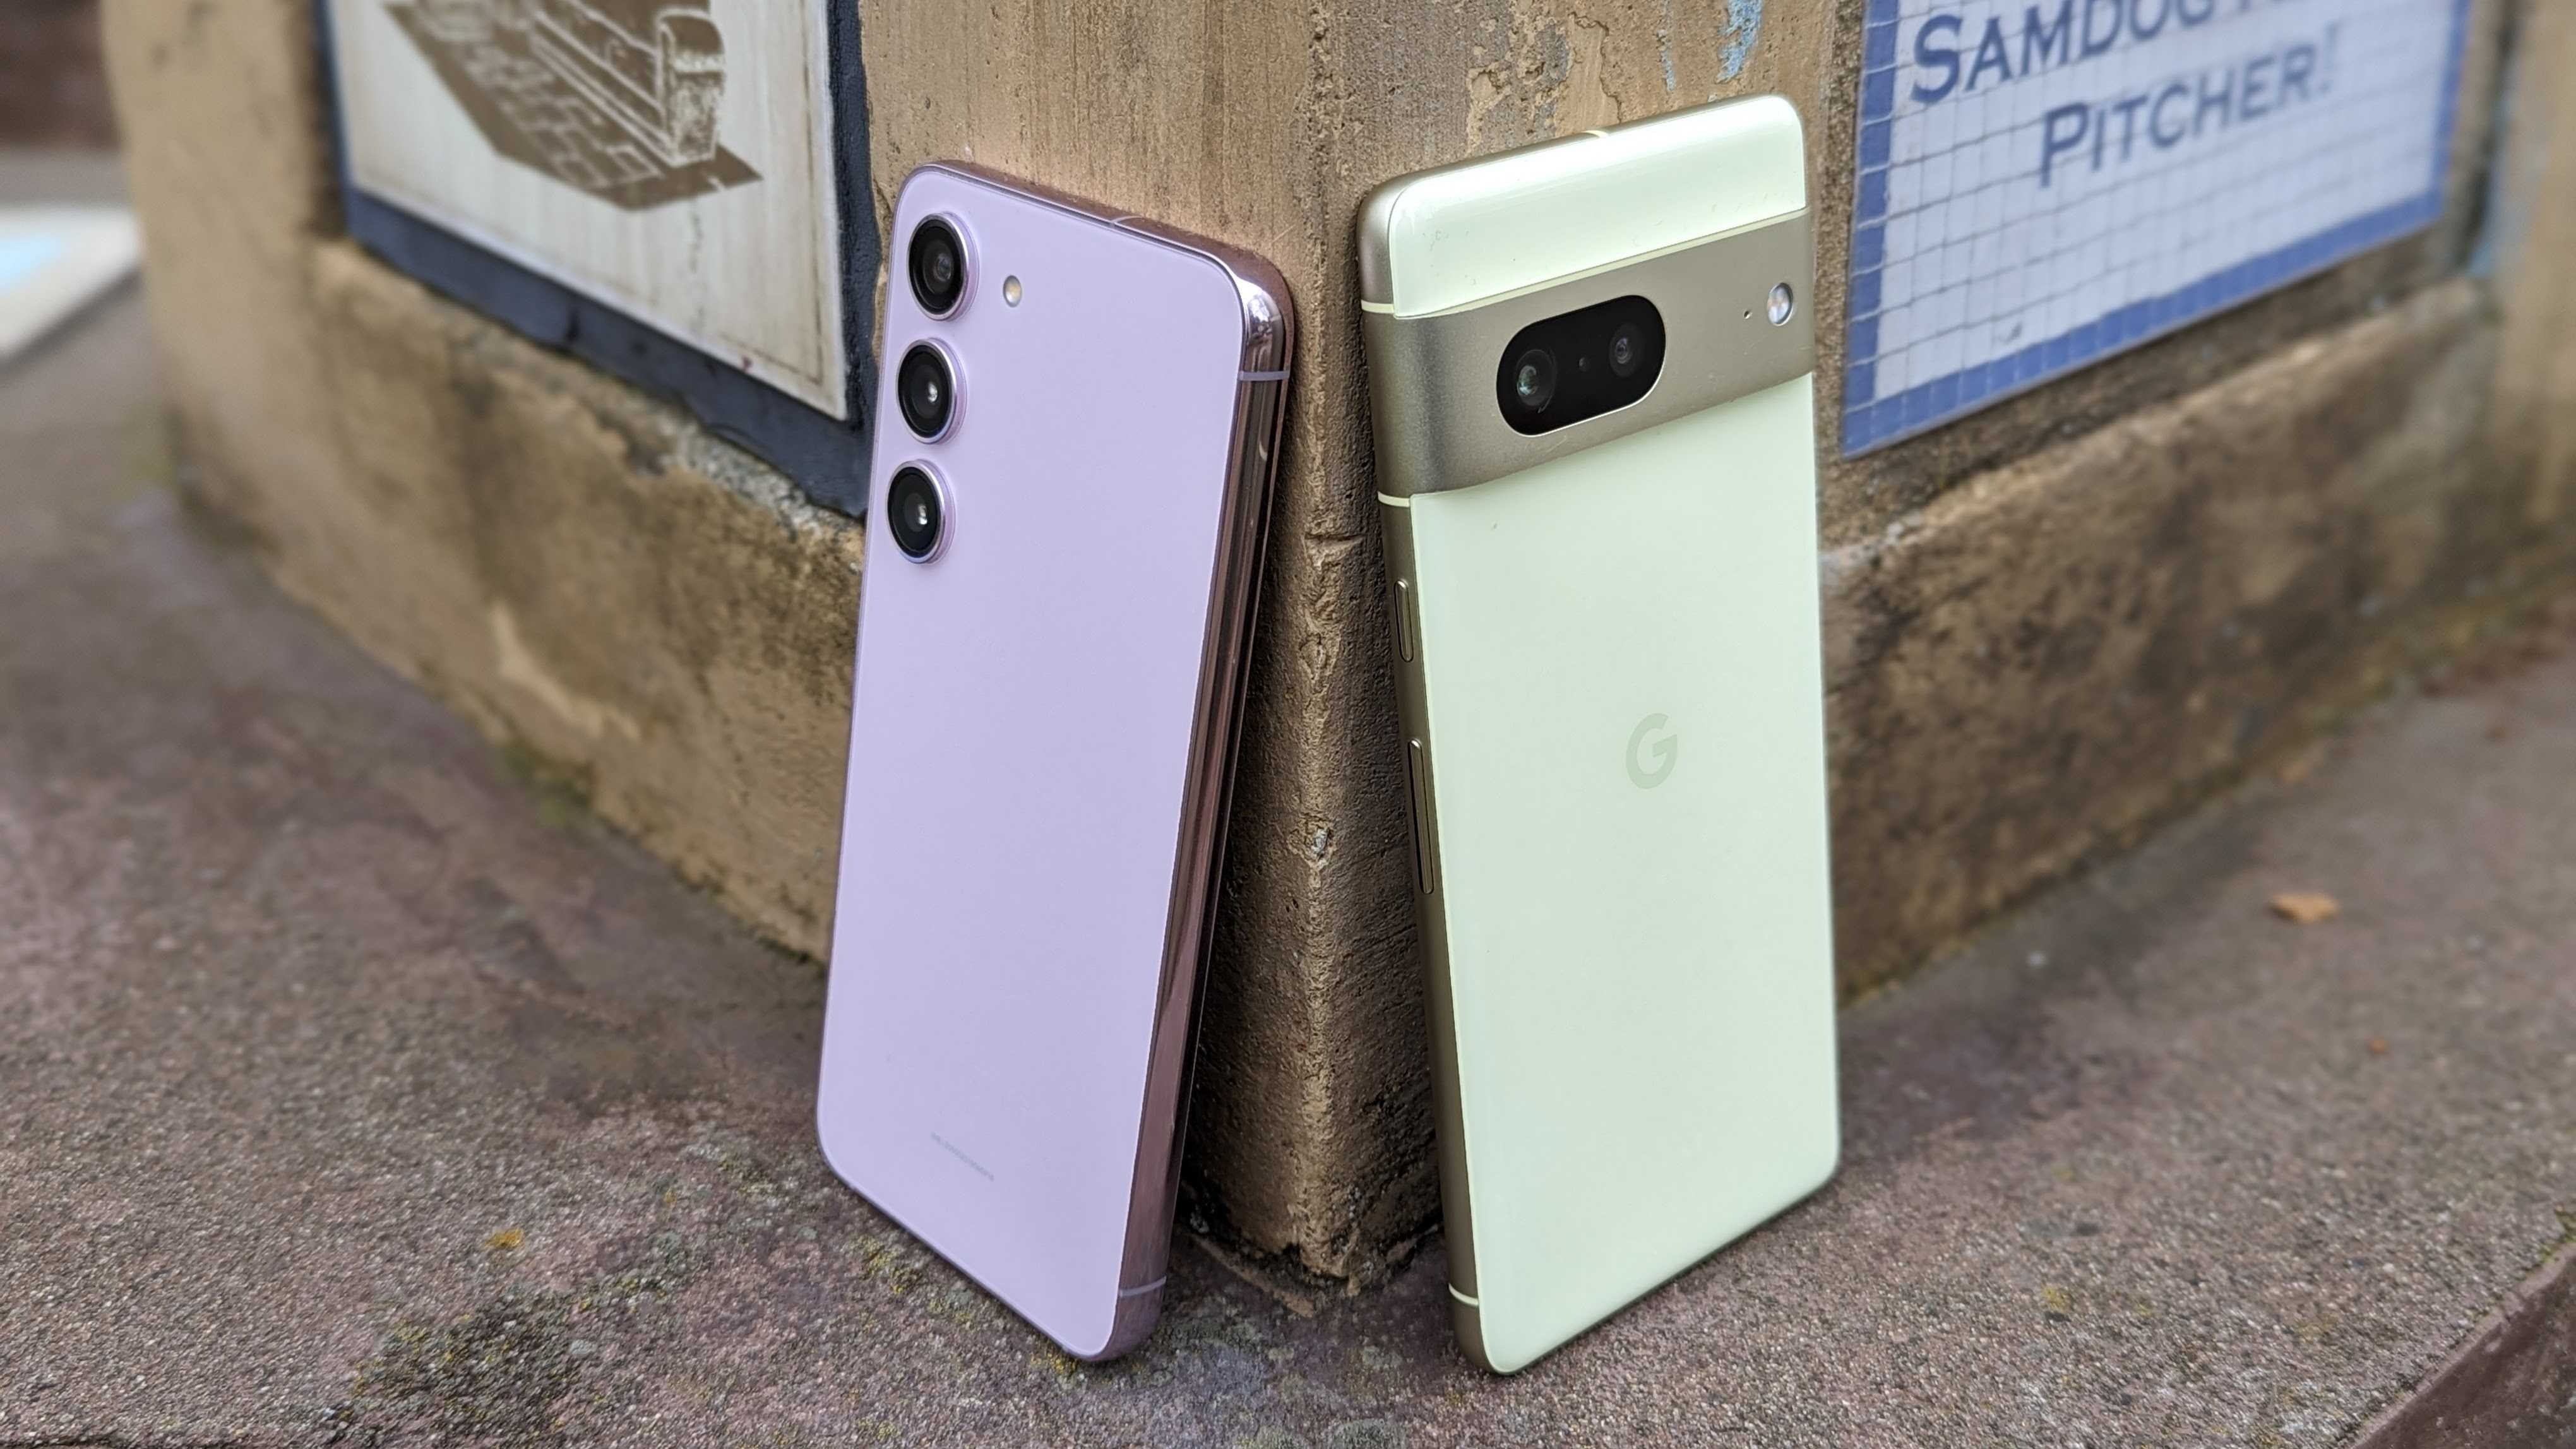 The Galaxy S23 and Pixel 7 next to each other on a corner